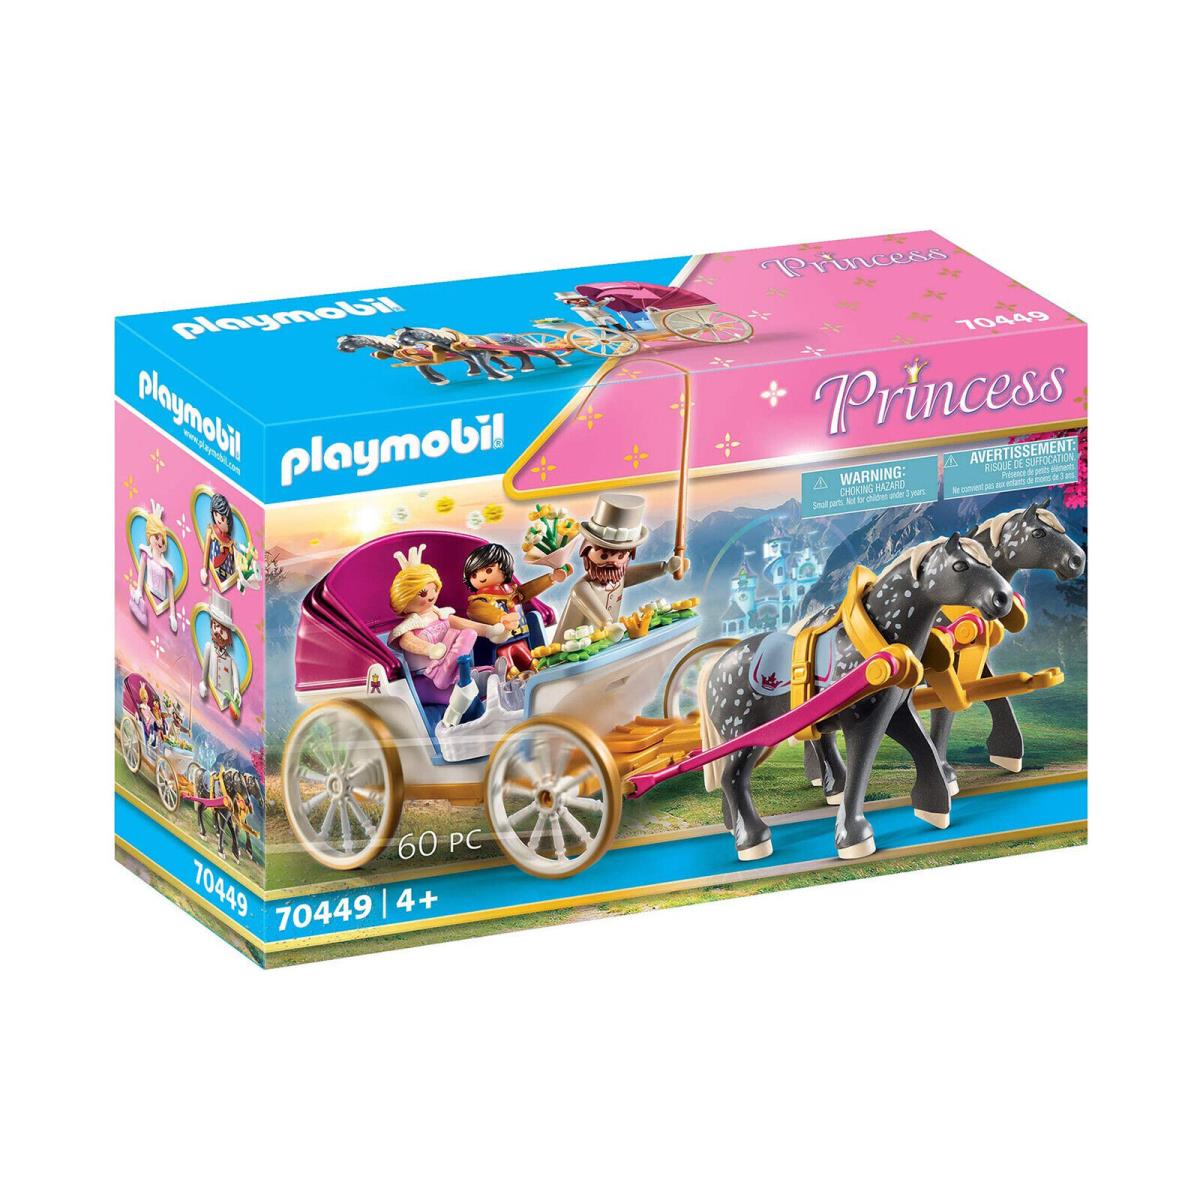 Playmobil Princess Horse-drawn Carriage Building Set 70449 IN Stock